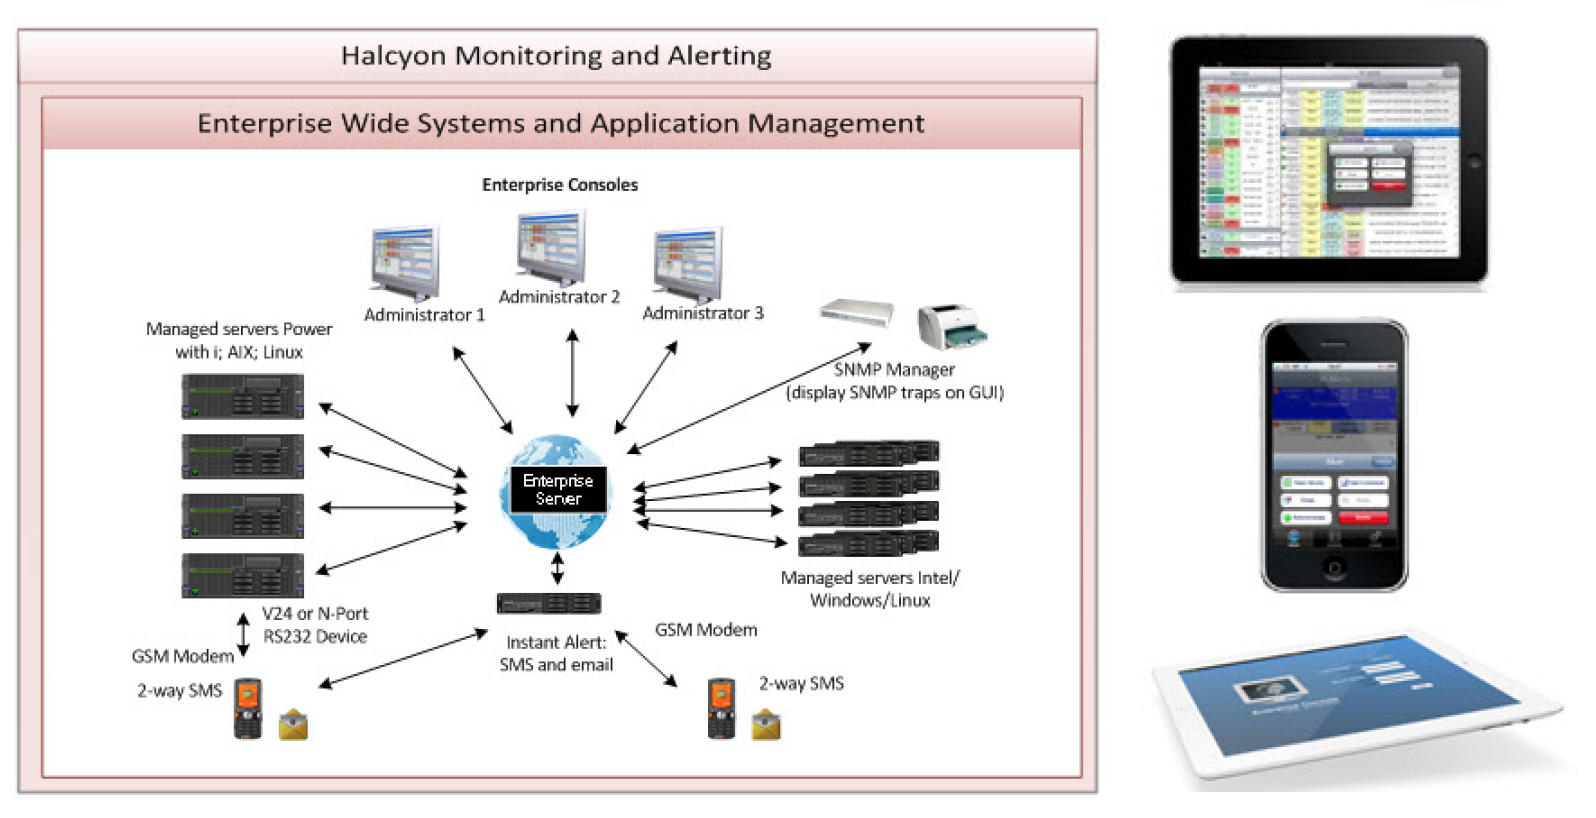 Enterprise Wide System and Application Monitoring with Remote Access Options